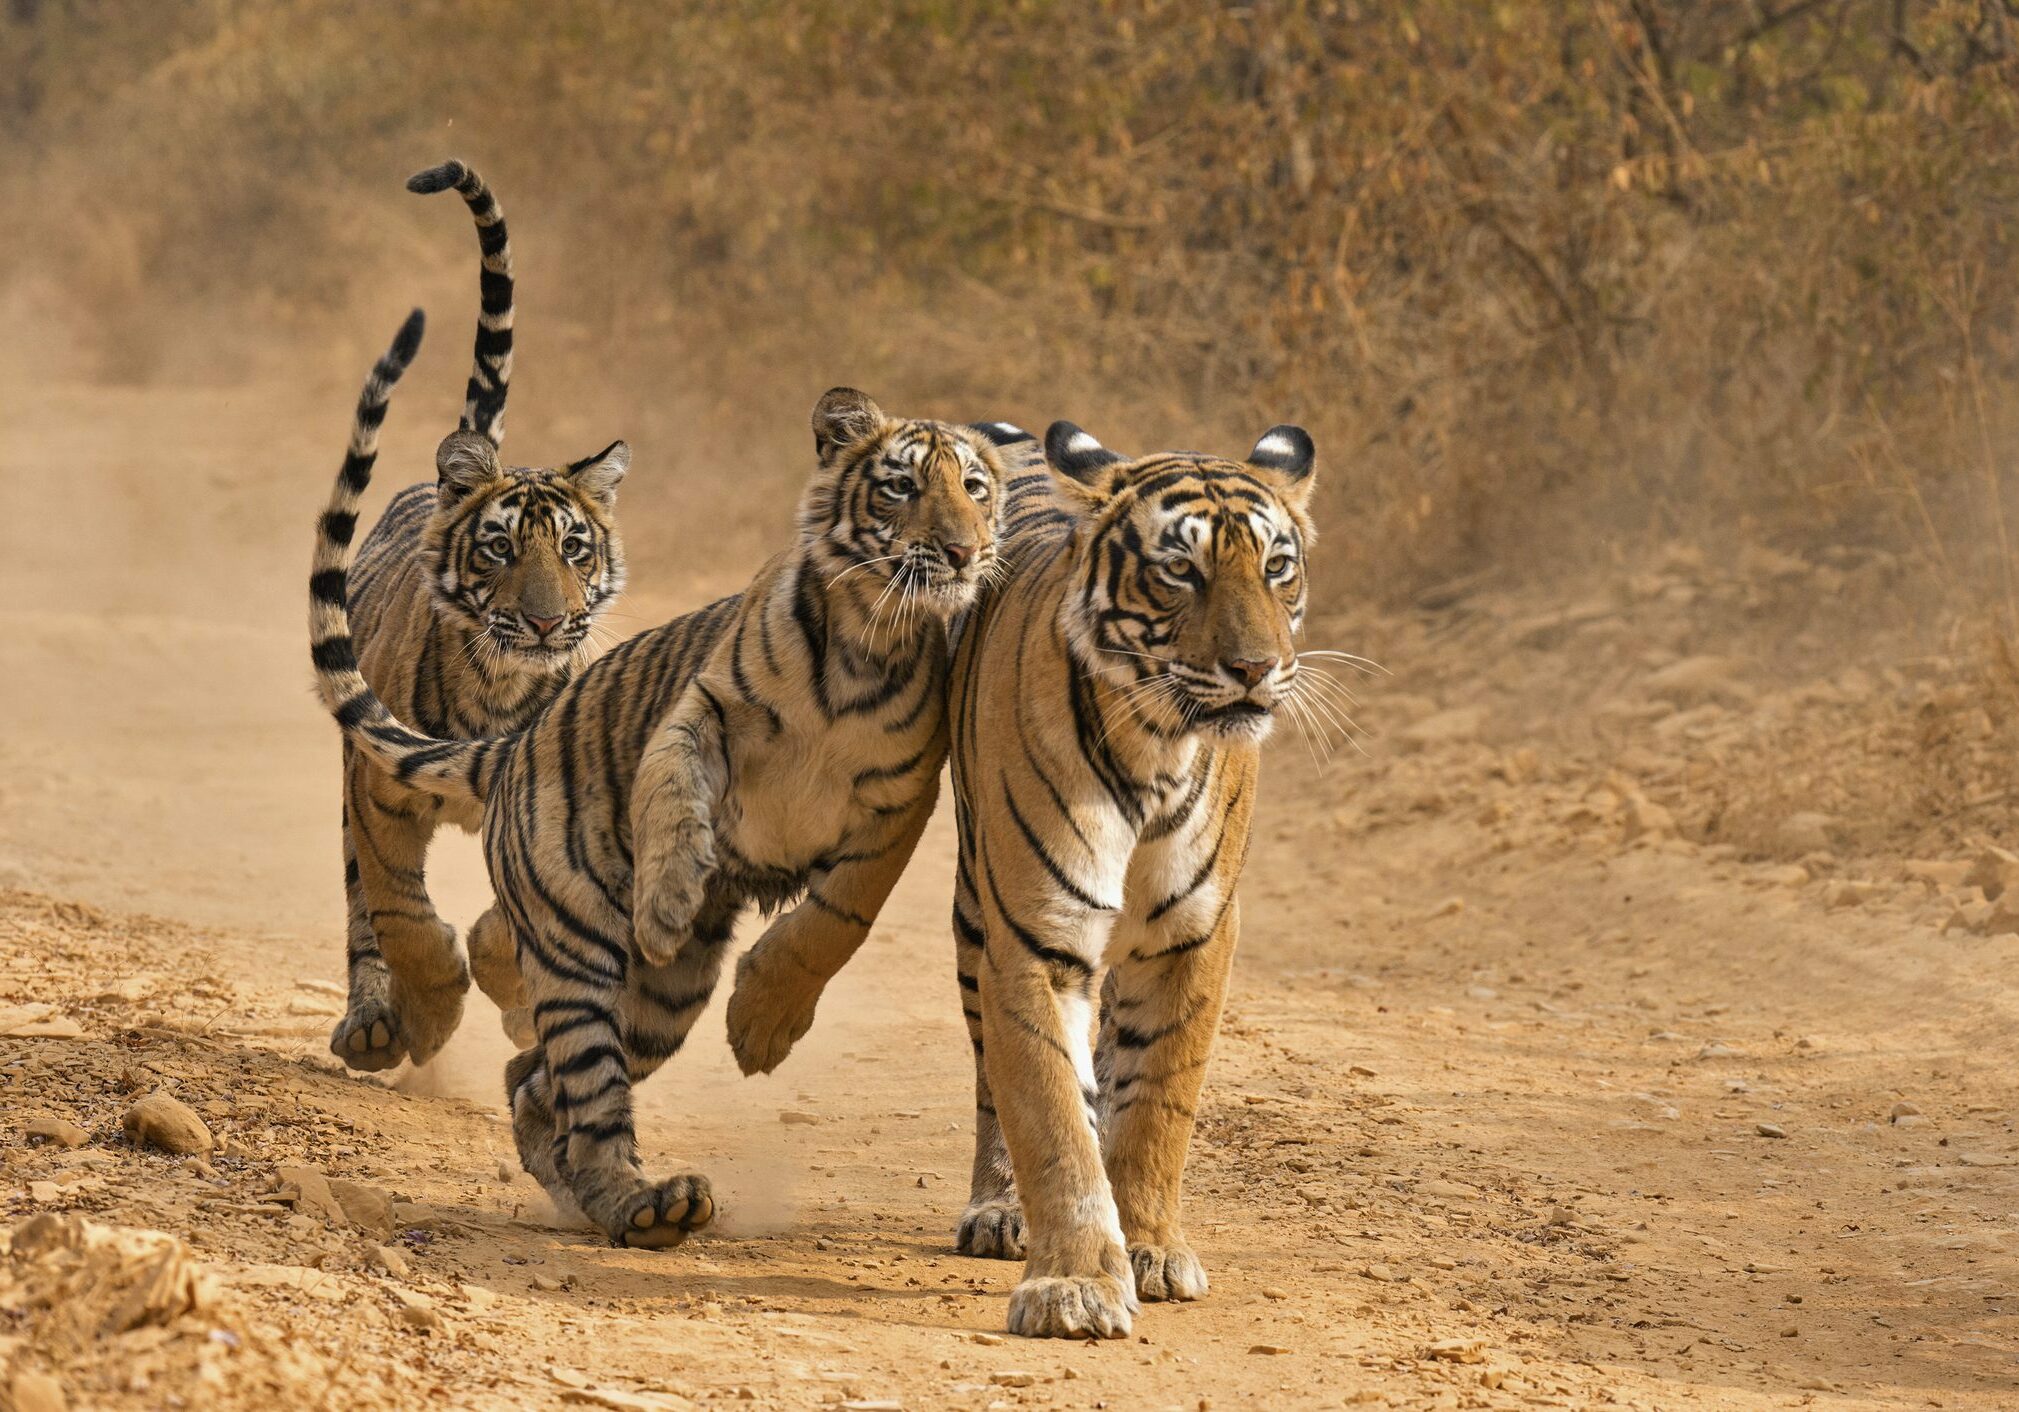 Three wild Bengal tiger - one mother and her two sub adult cubs, in a dirt track in the dry forests of Ranthambhore. The mother is walking towards the camera and one of her cubs is jumping on her tenderly, while the other cub is running towards them in the background.